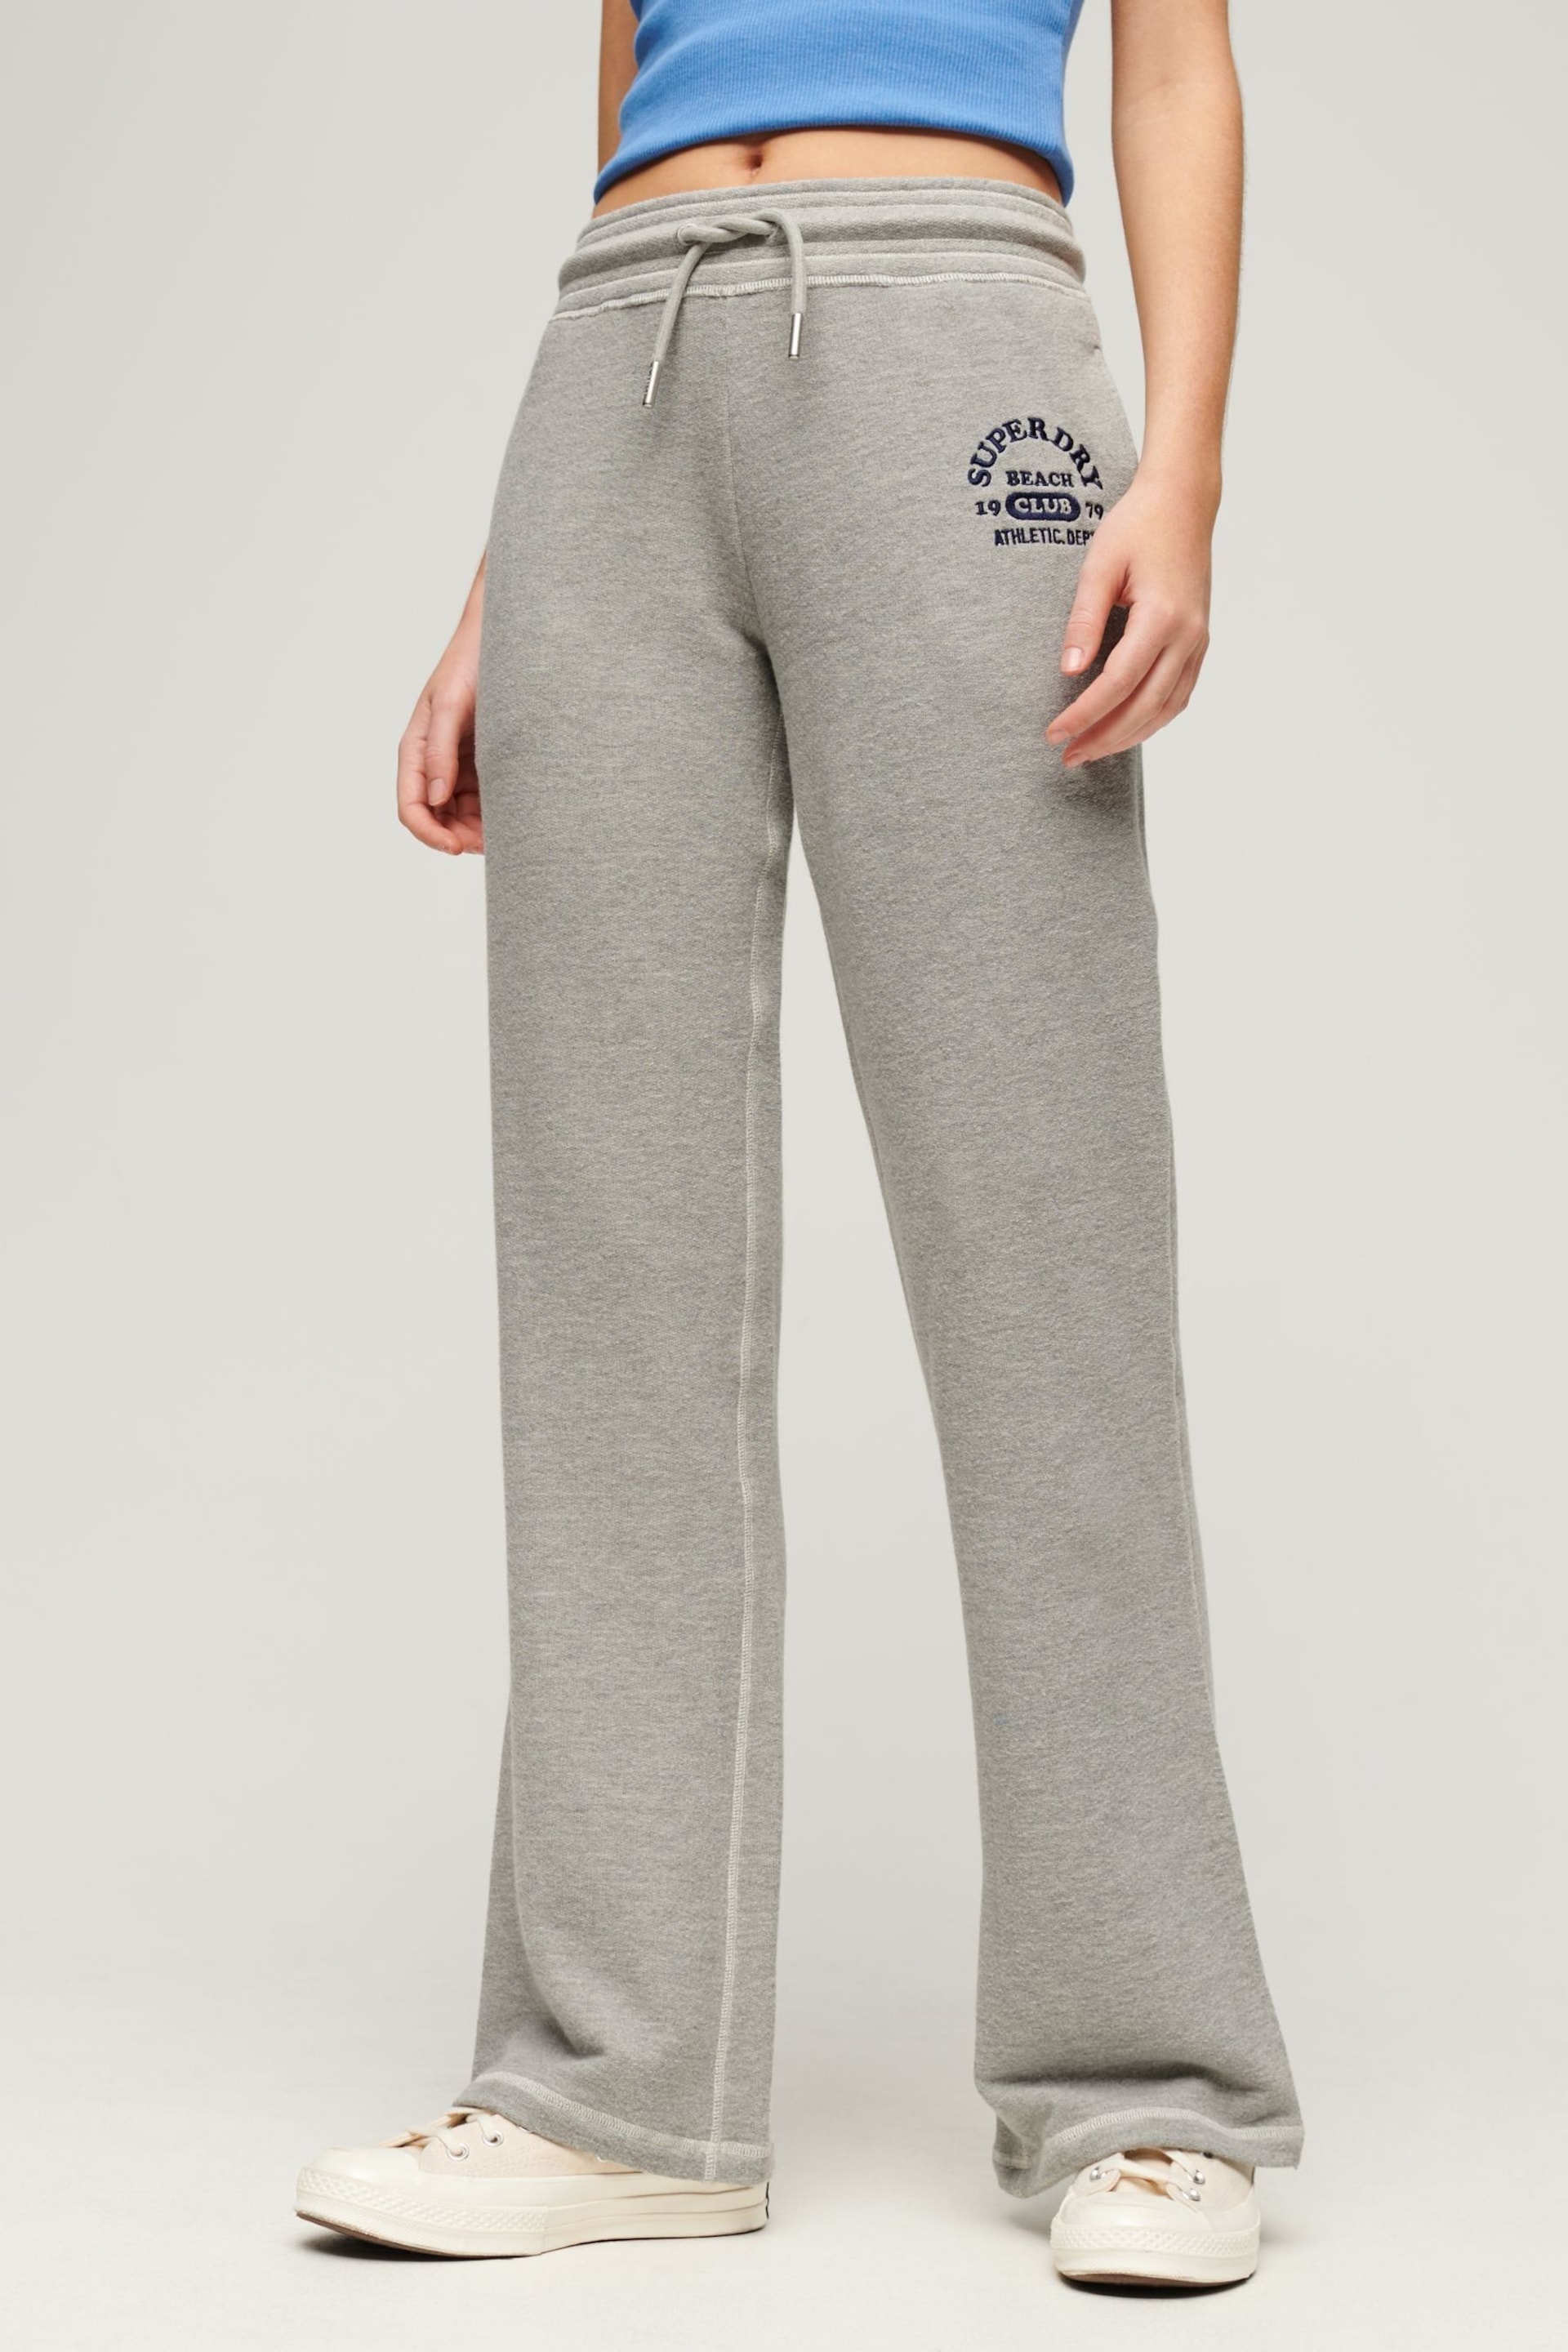 Superdry Grey Athletic Essentials Low Rise Flare Joggers - Image 1 of 4